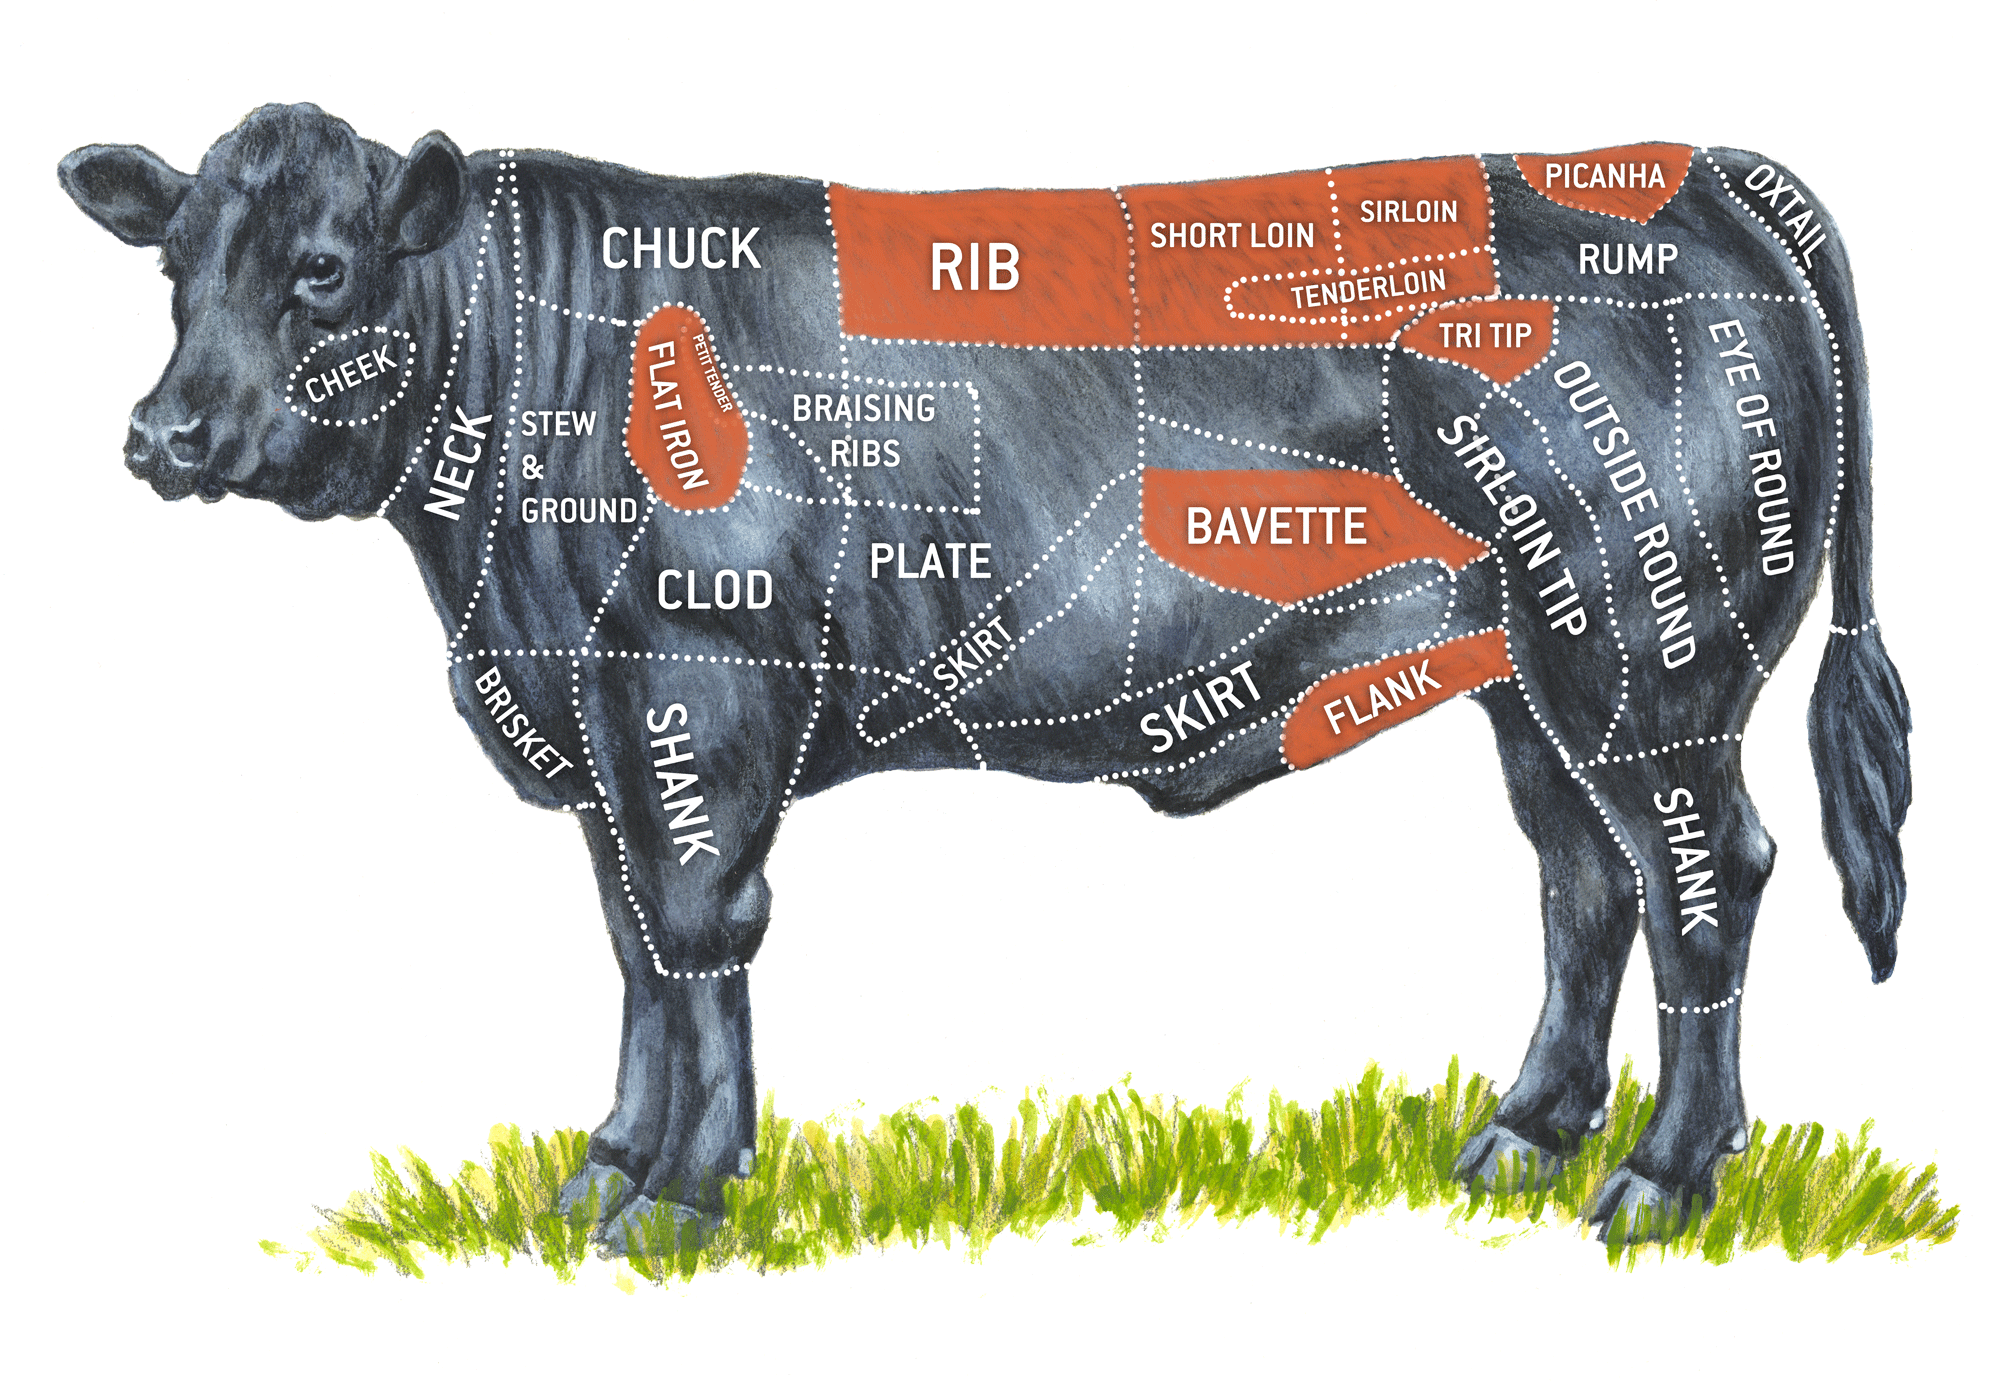 A Complete Guide to Steak Kitchn